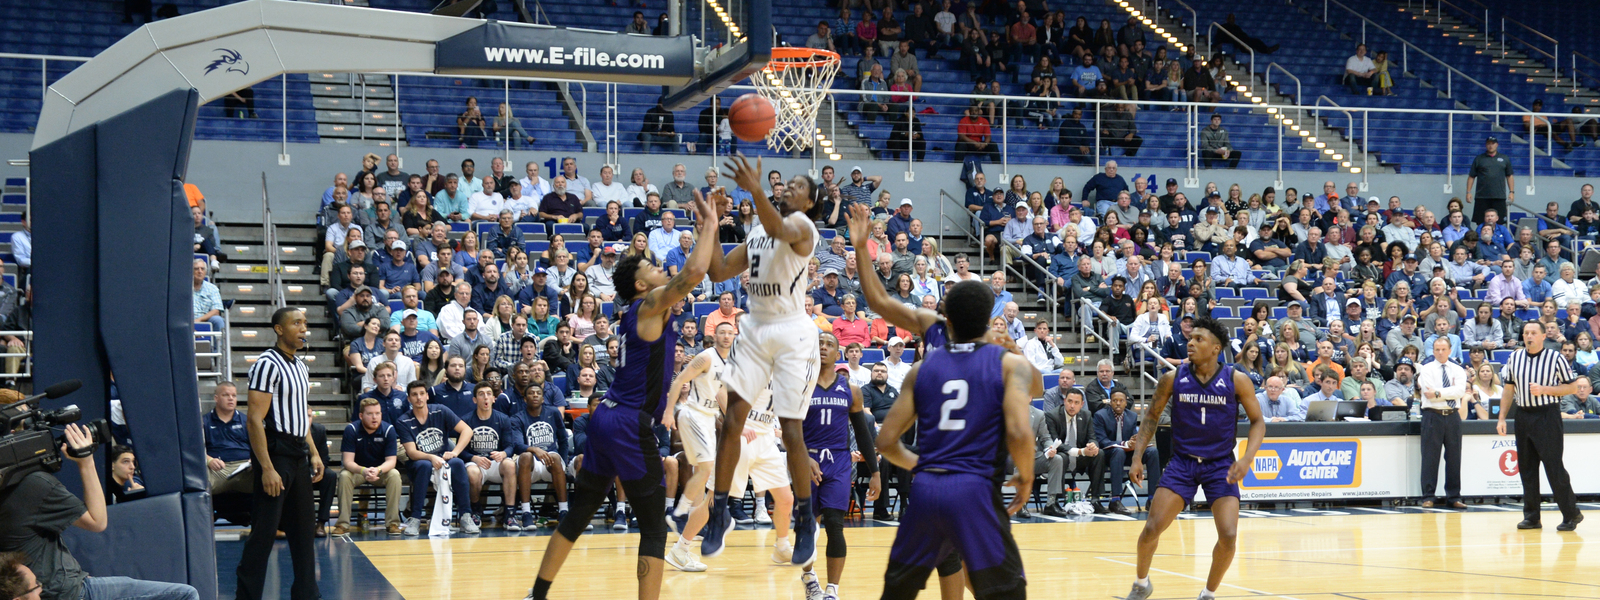 UNF's men basketball team at a game with a player tossing the ball into the hoop